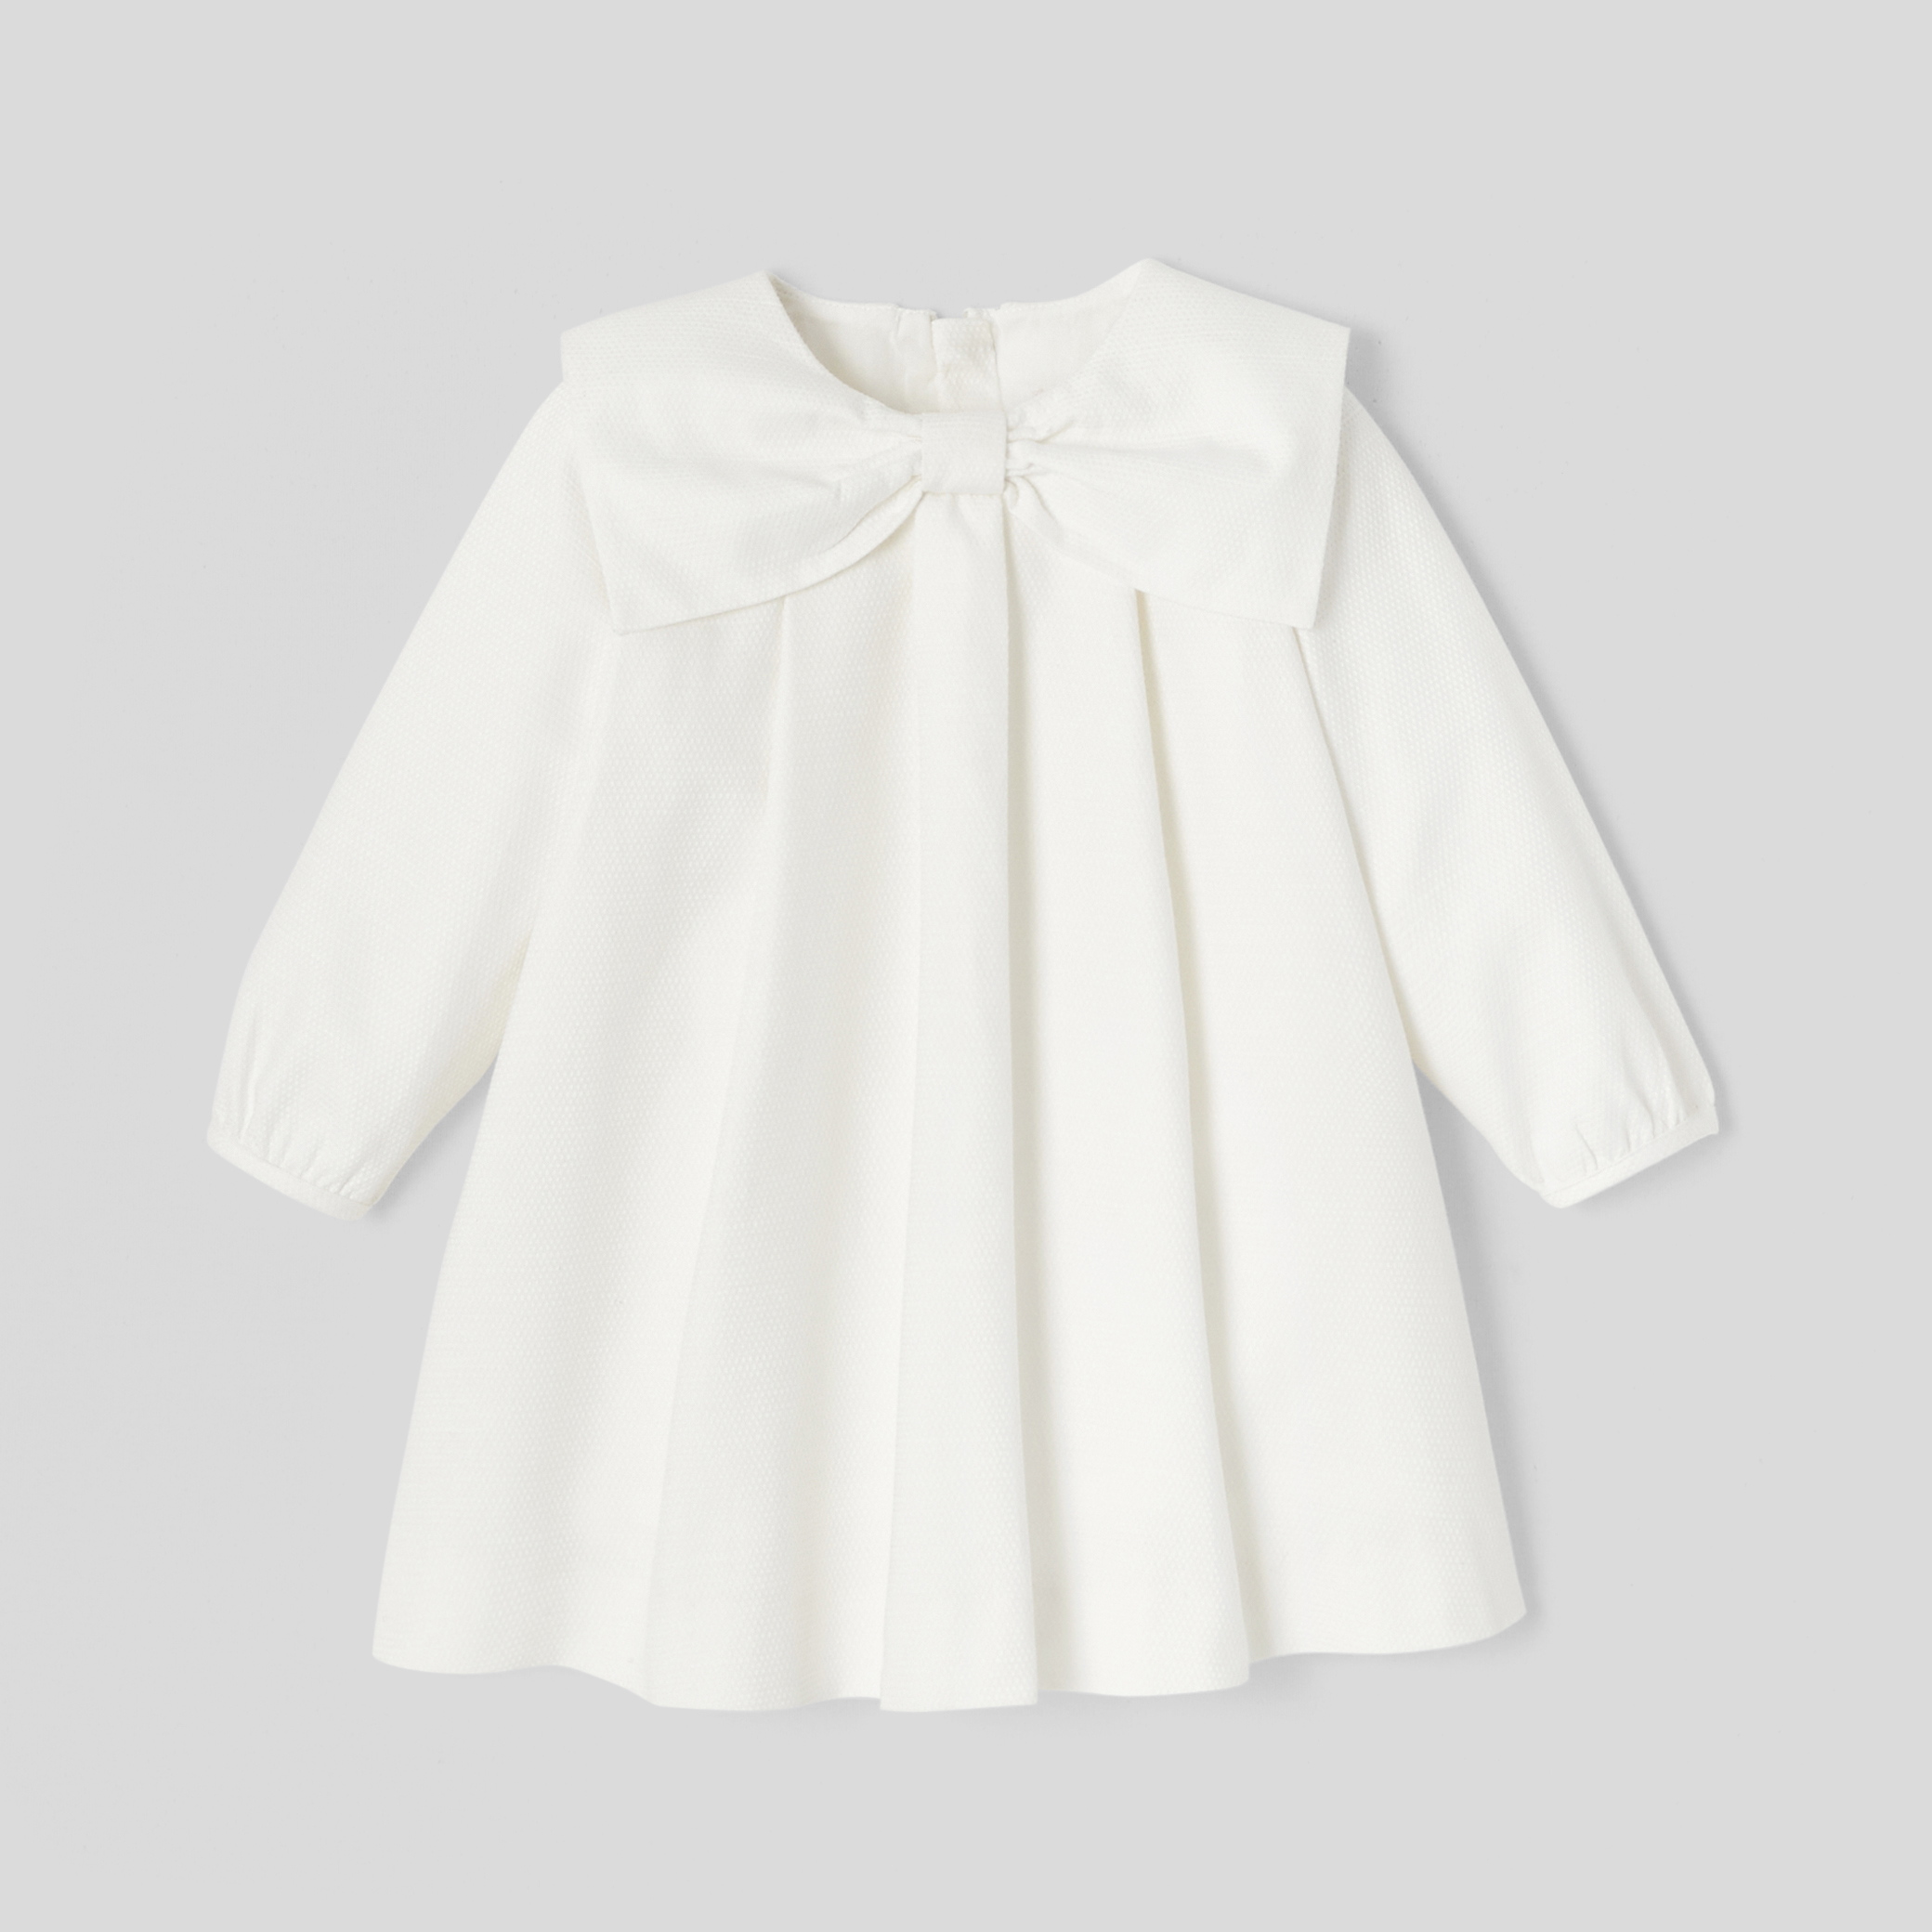 Baby girl dress for special occasions